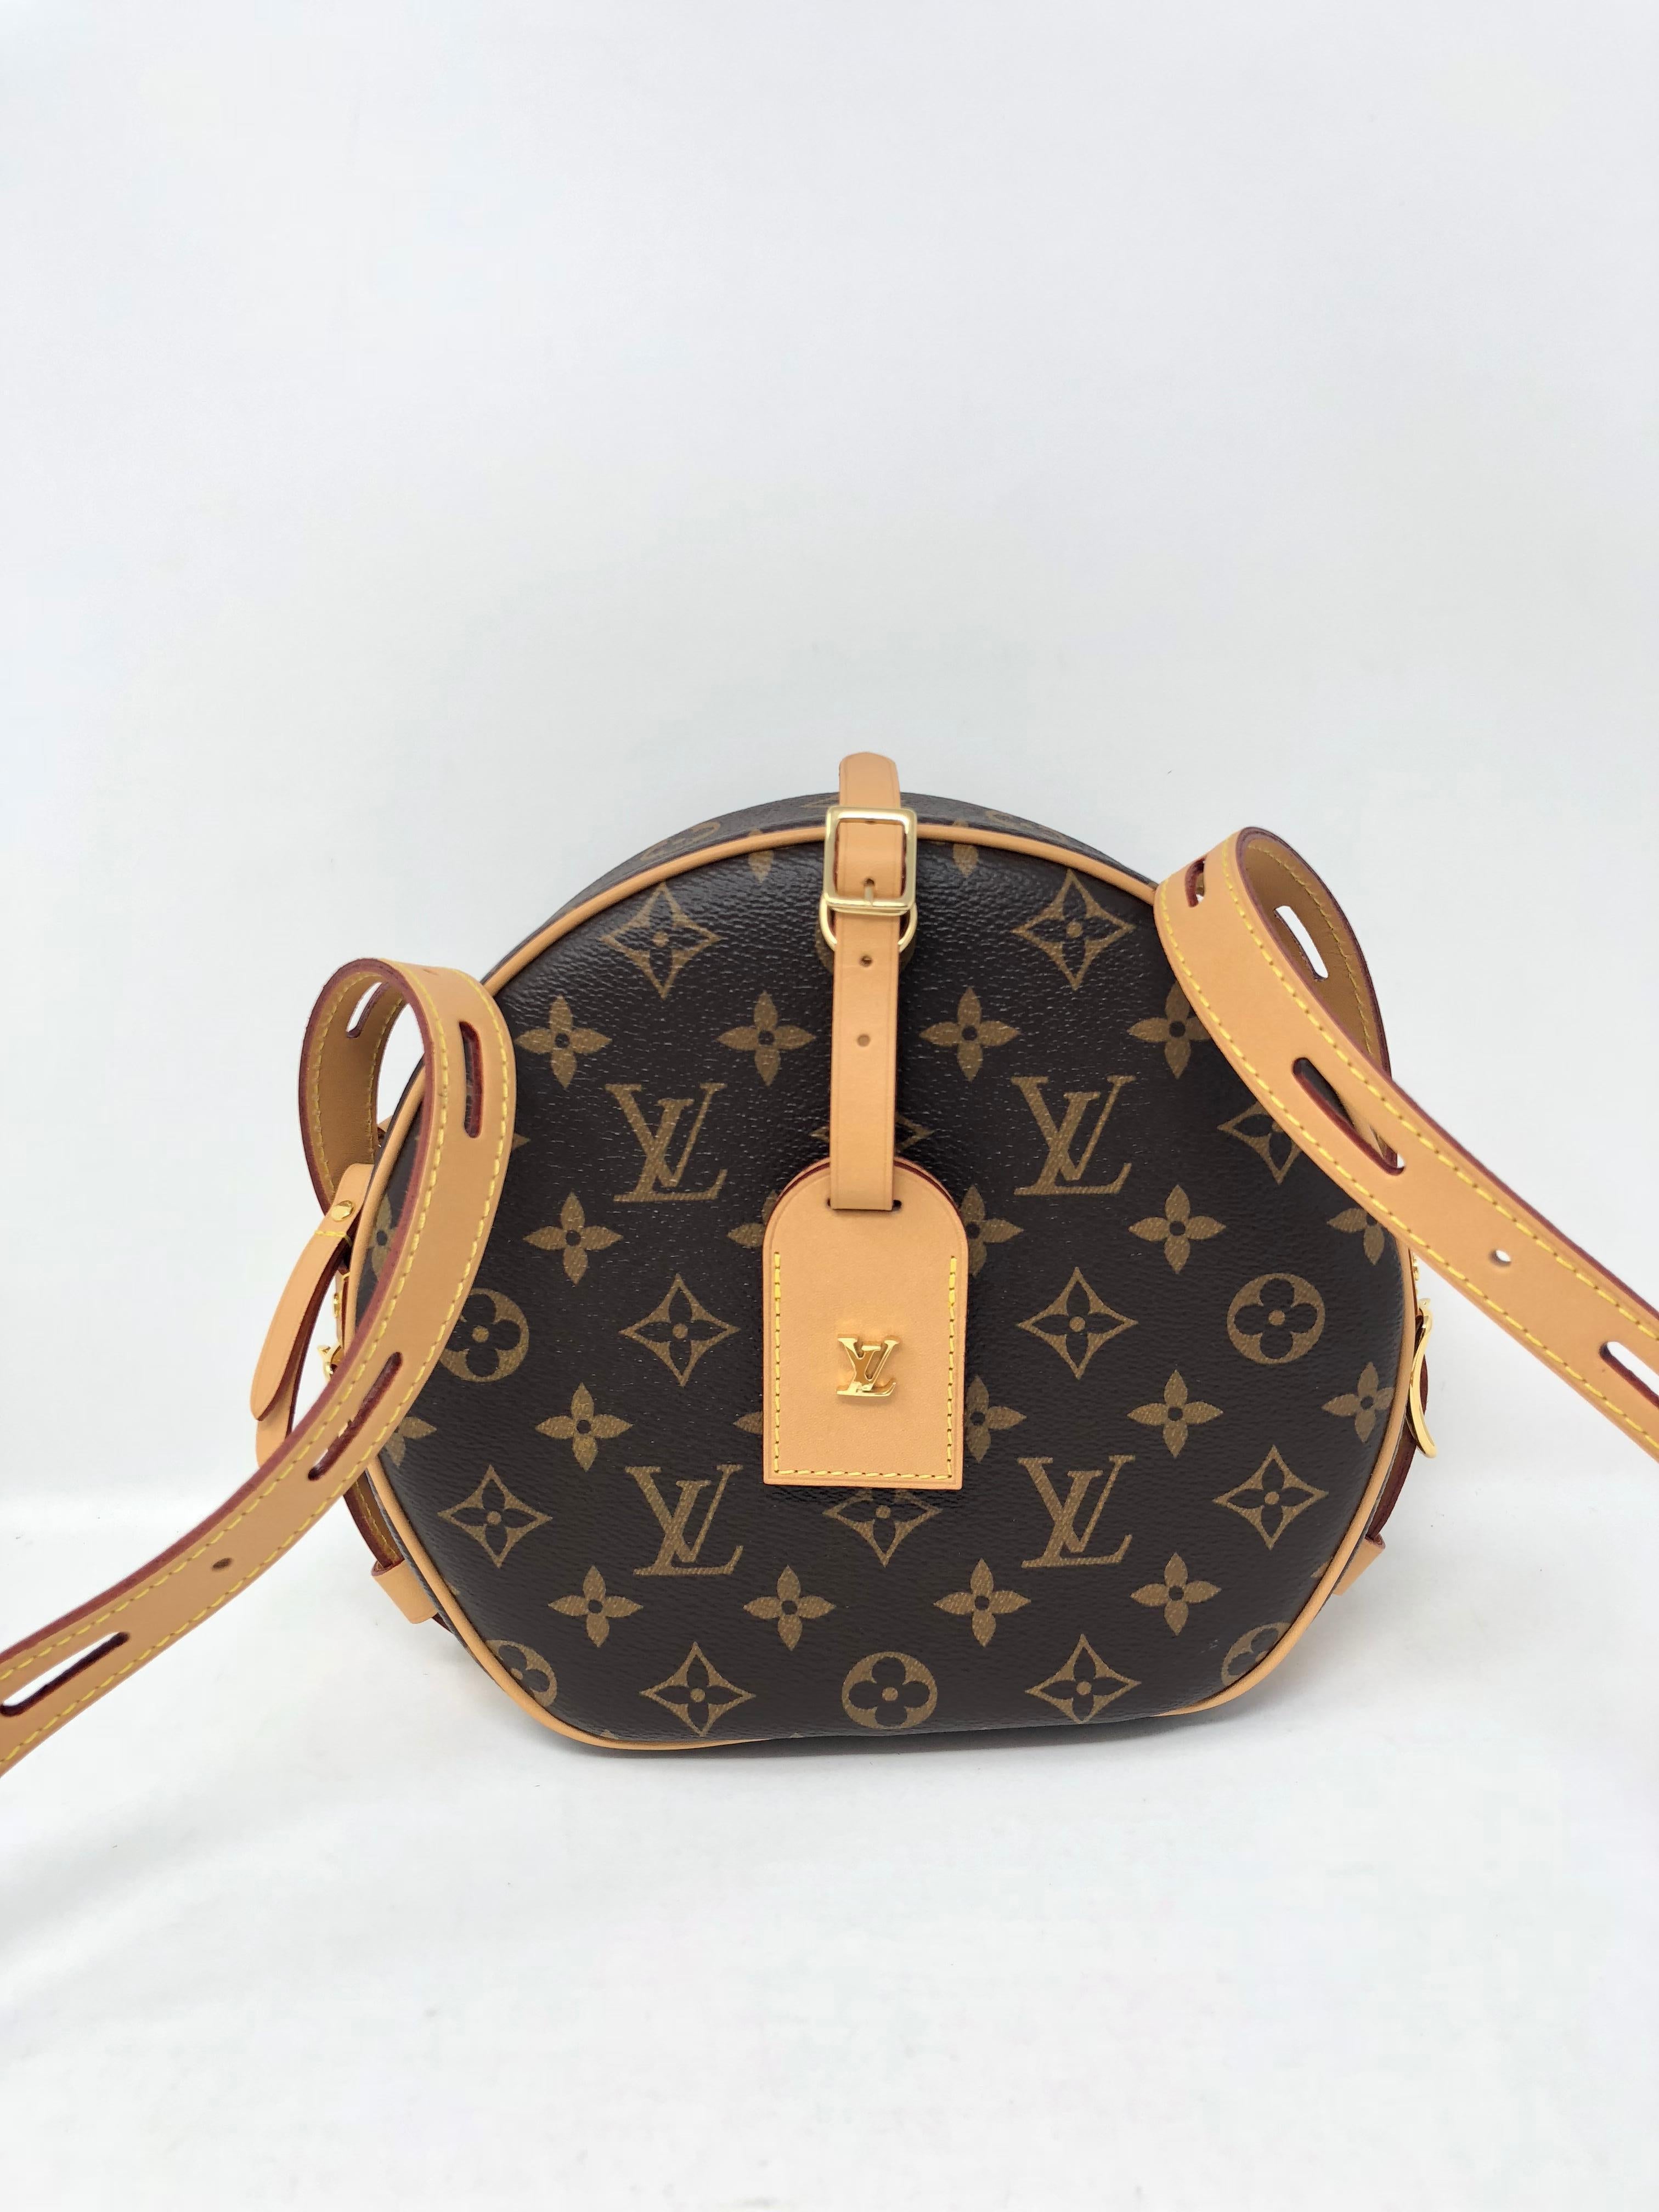 Louis Vuitton Boite Chapeau Souple in monogram is Brand new and sold out. It is extremely limited and a must have for all LV lovers. The bag is inspired by the classic hat box from the House's travel heritage. It can be worn across the shoulder or